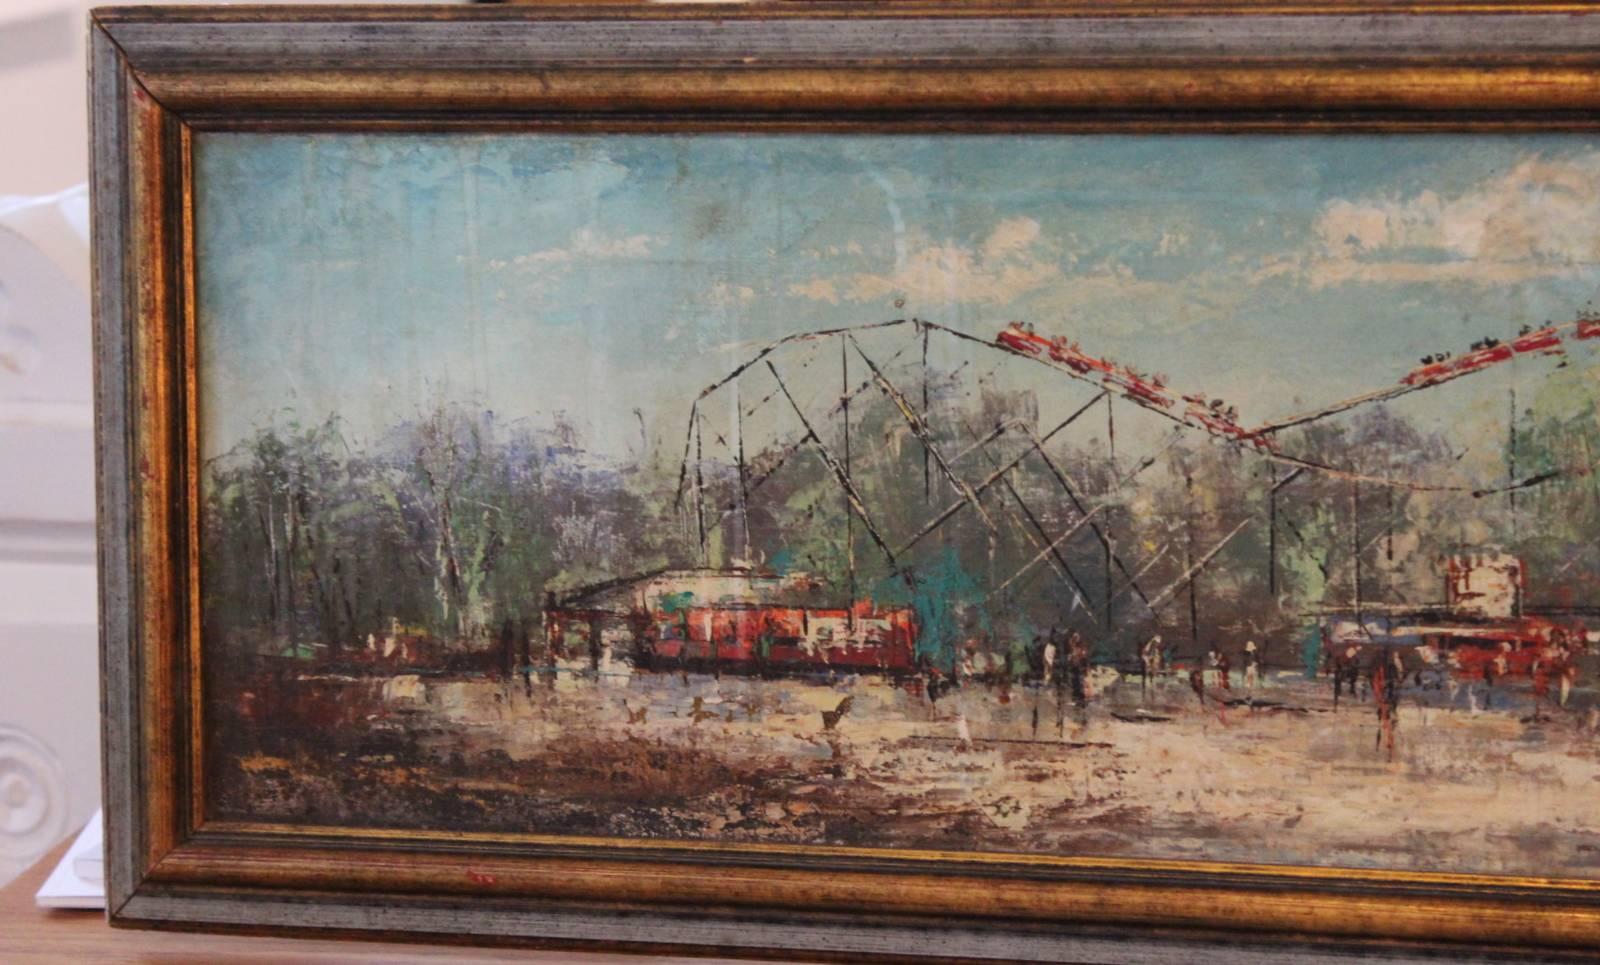 Mid-20th Century Oil Painting of a Carnival Roller Coaster and Ferris Wheel Amusement Park